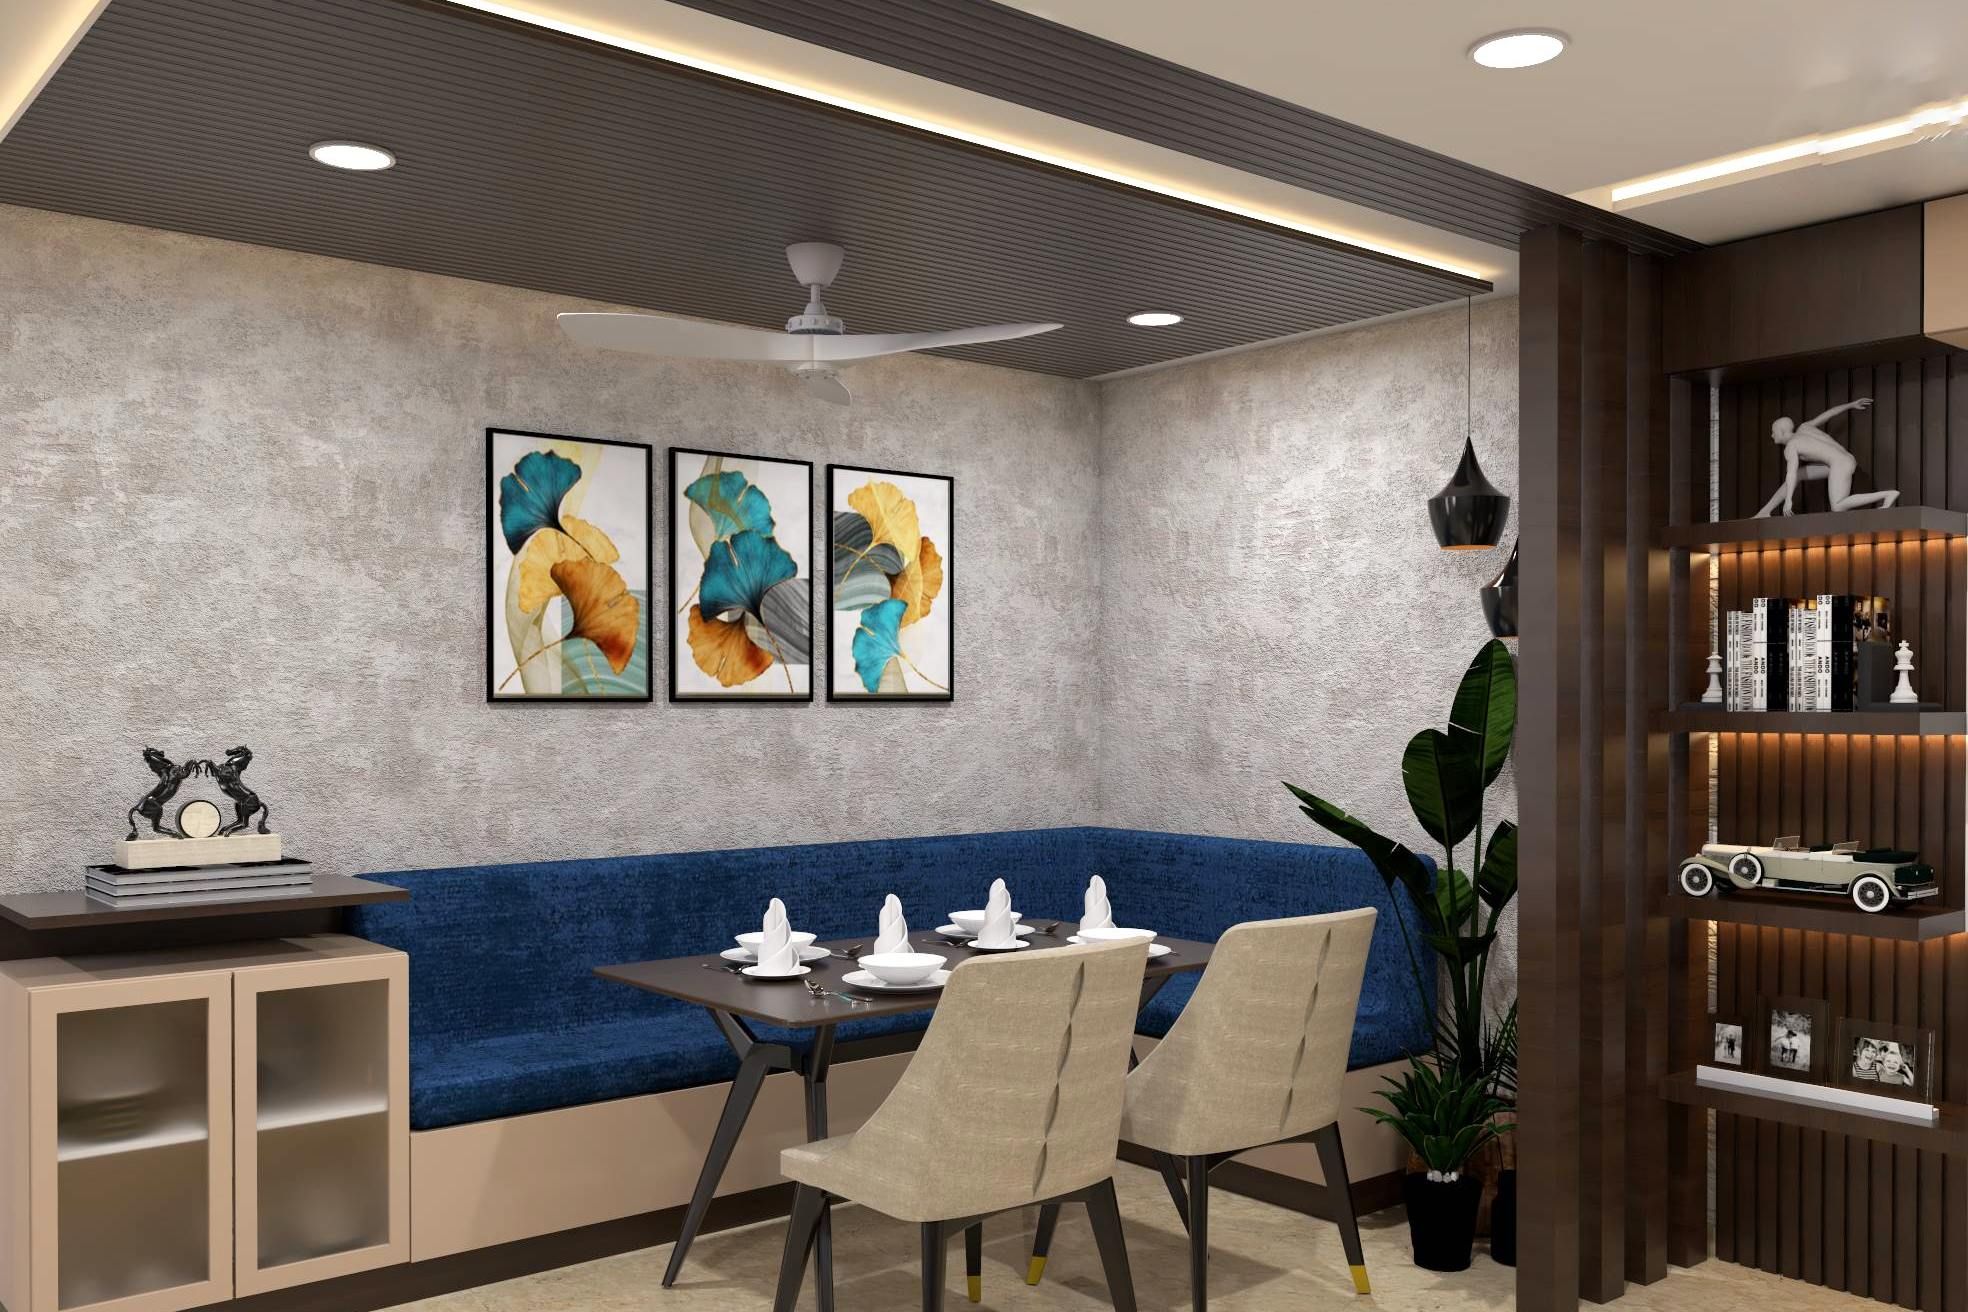 Modern Dining Room Design With Upholstered Blue Seater